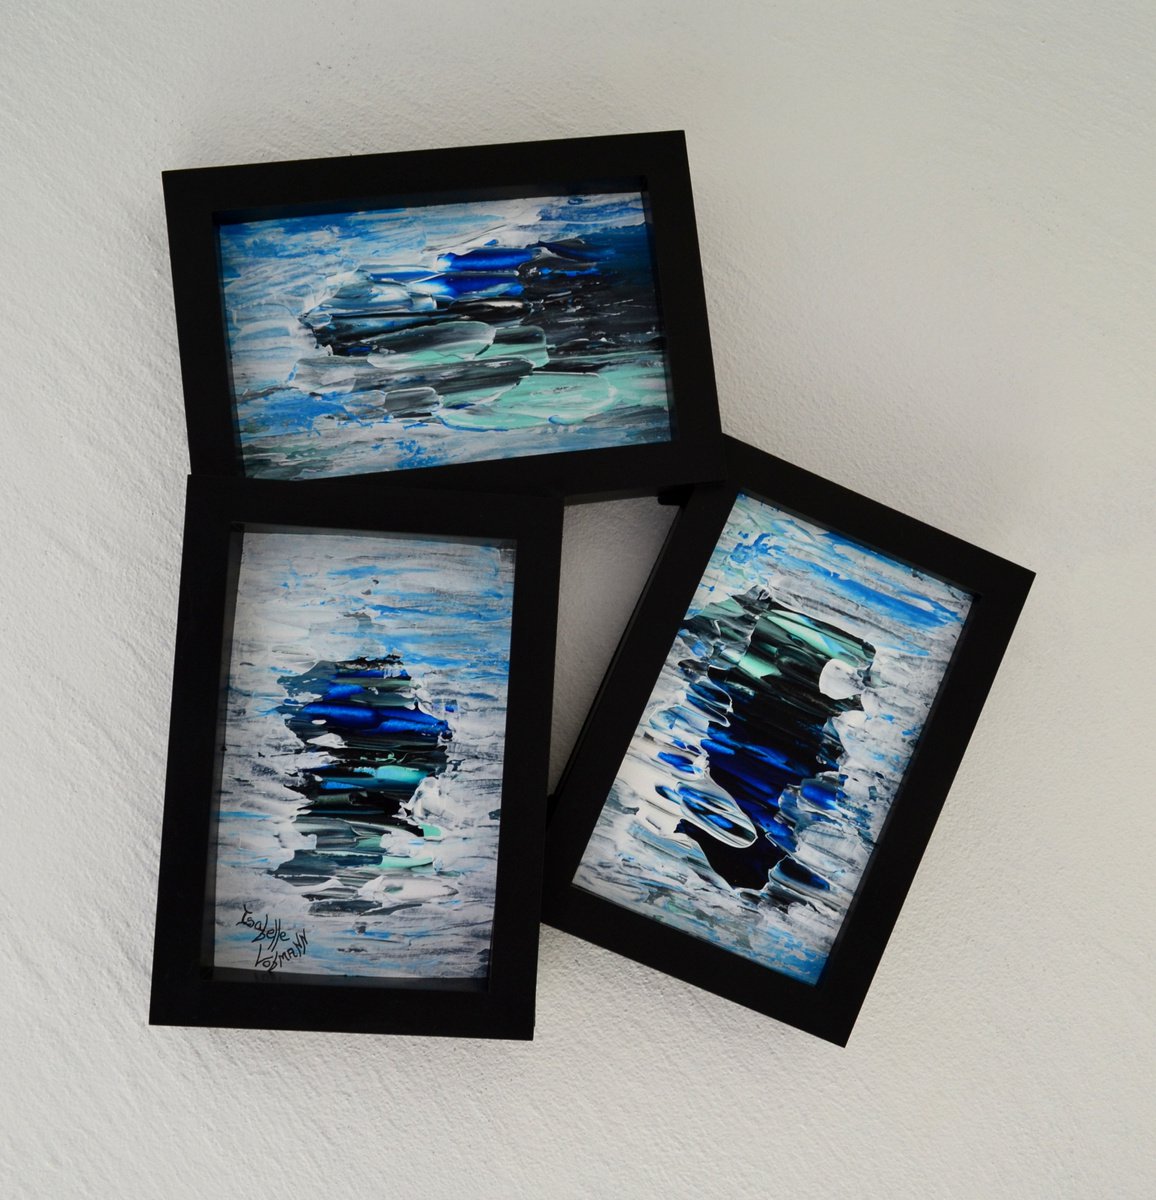 NEW ! ABSTRACT DECO 2 - MINIATURE ABSTRACT PAINTING FRAMED AND READY TO HANG - HOME DECO - by Isabelle Vobmann